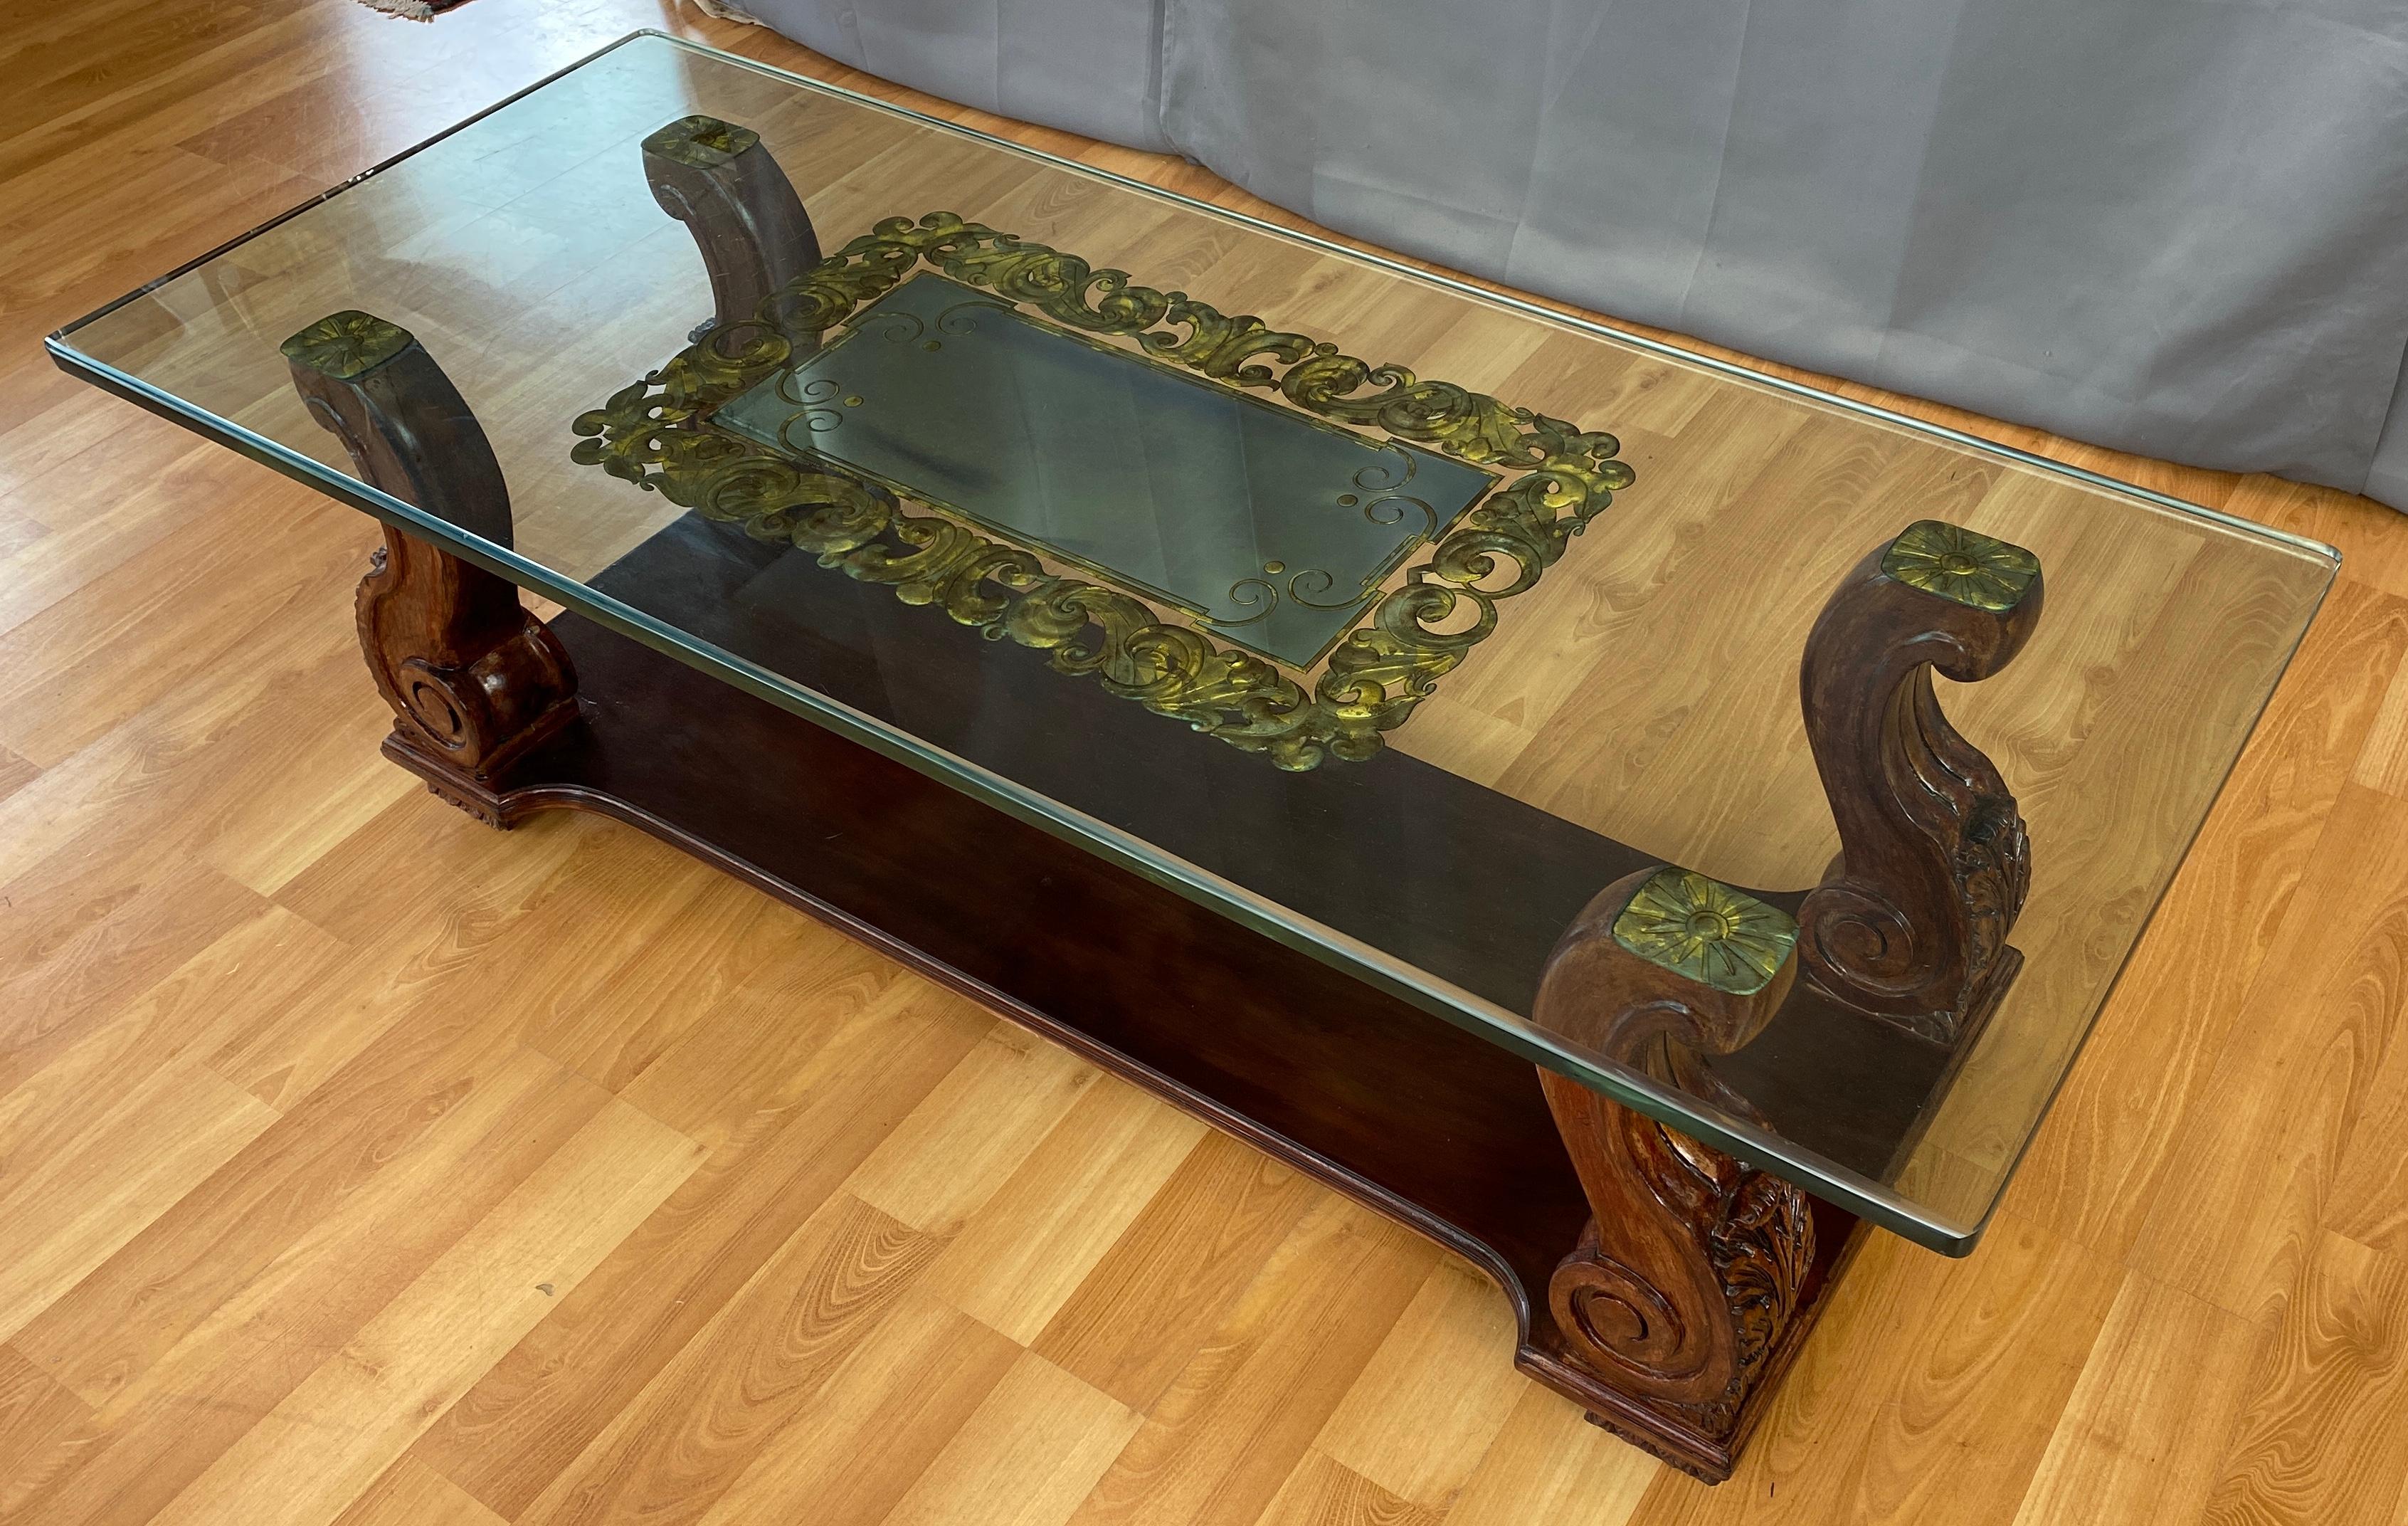 Offered here is a circa 1930s carved glass verre églomisé coffee table, created by Harriton Carved Glass in New York City.

The company created many works of art during their time of existence 1920s to early 1960s. From glass panels you'd find on a